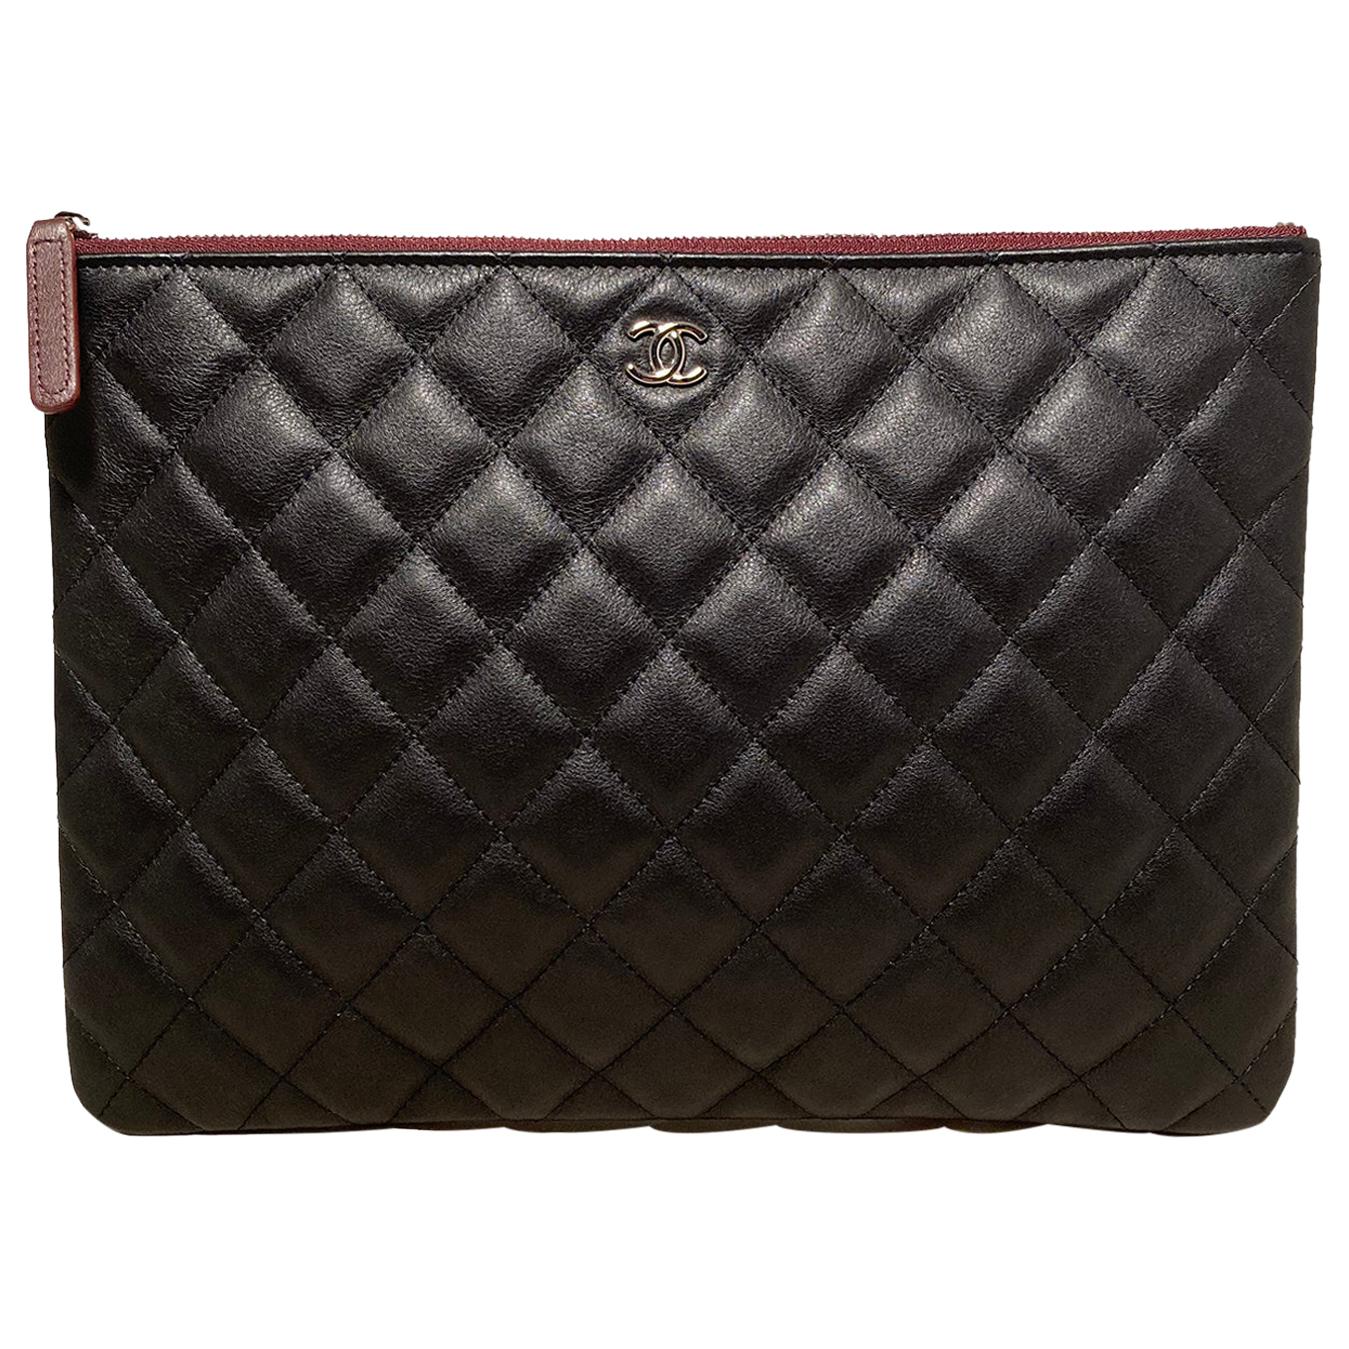 Chanel Black Quilted Leather Medium O Pouch